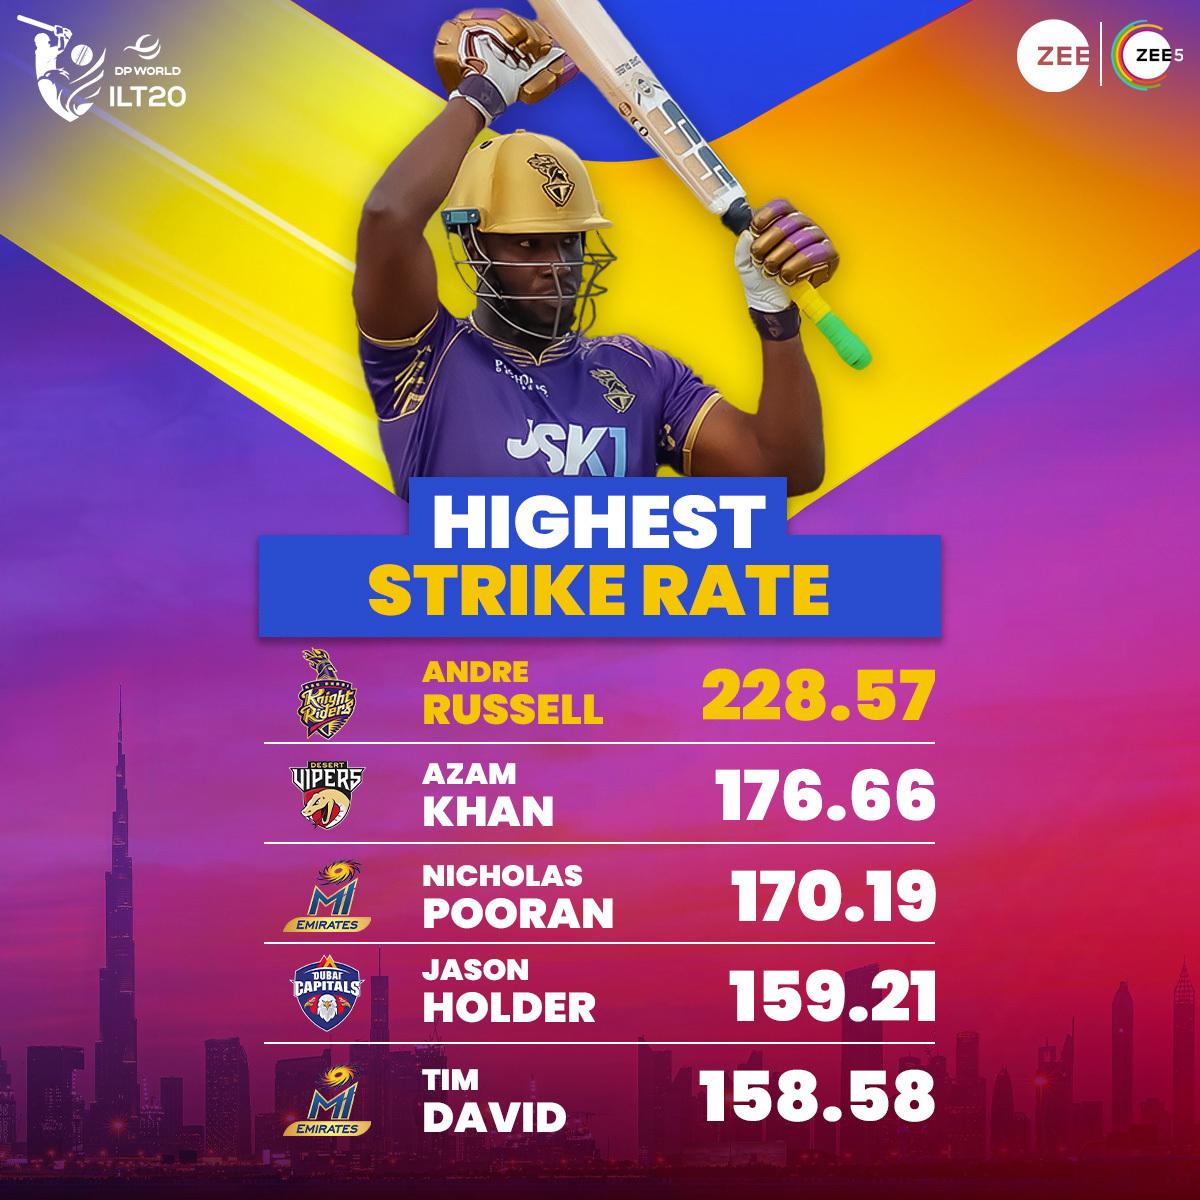 Russell the muscle with 🔝 performance for Abu Dhabi Knight Riders in Season 2⃣ 👏 #KoiKasarNahiChhodenge | #DPWorldILT20onZee